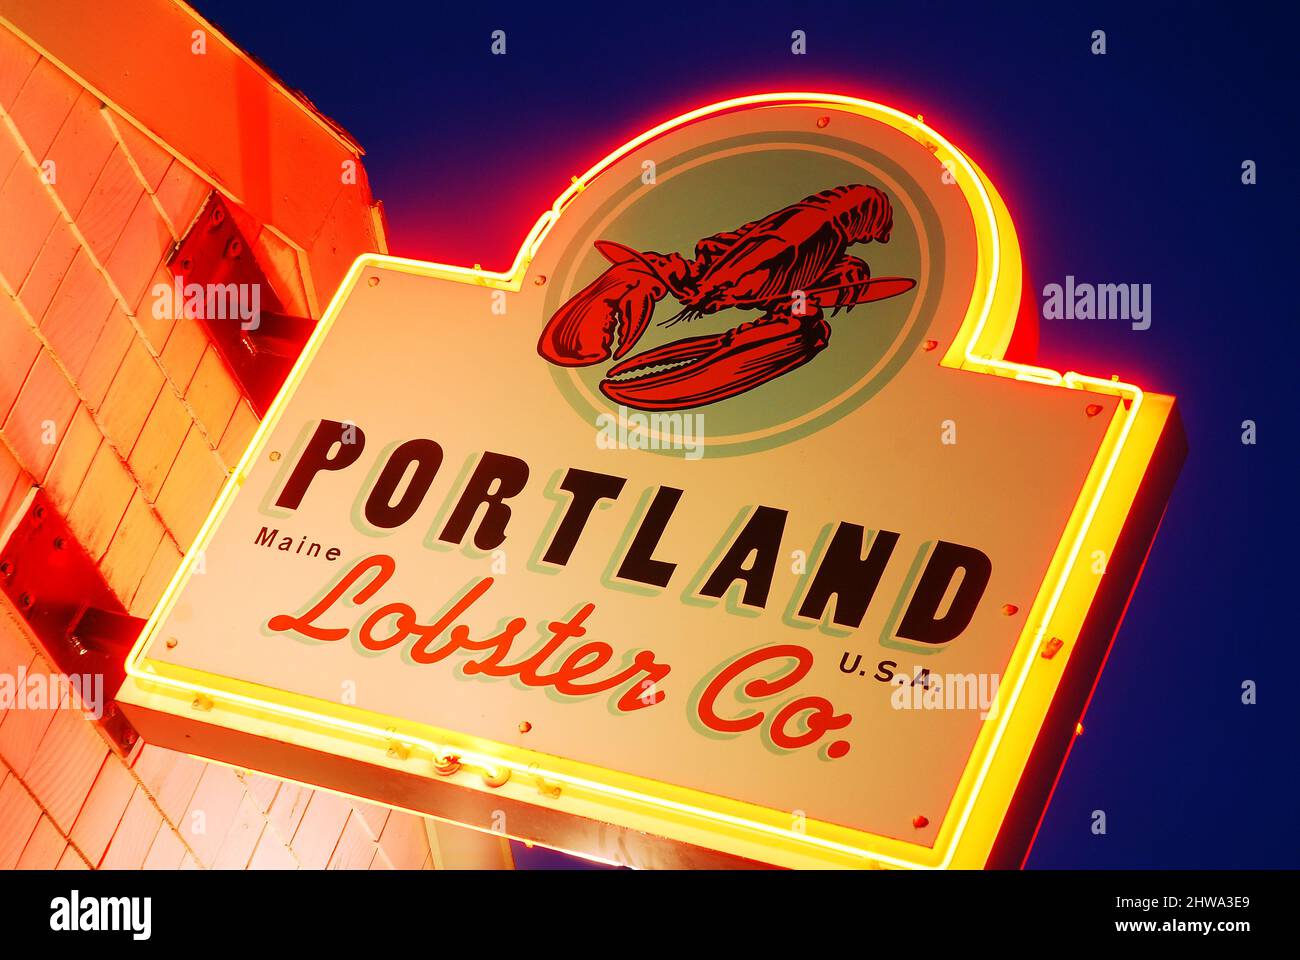 The glowing neon of the Portland Lobster Company sign Stock Photo